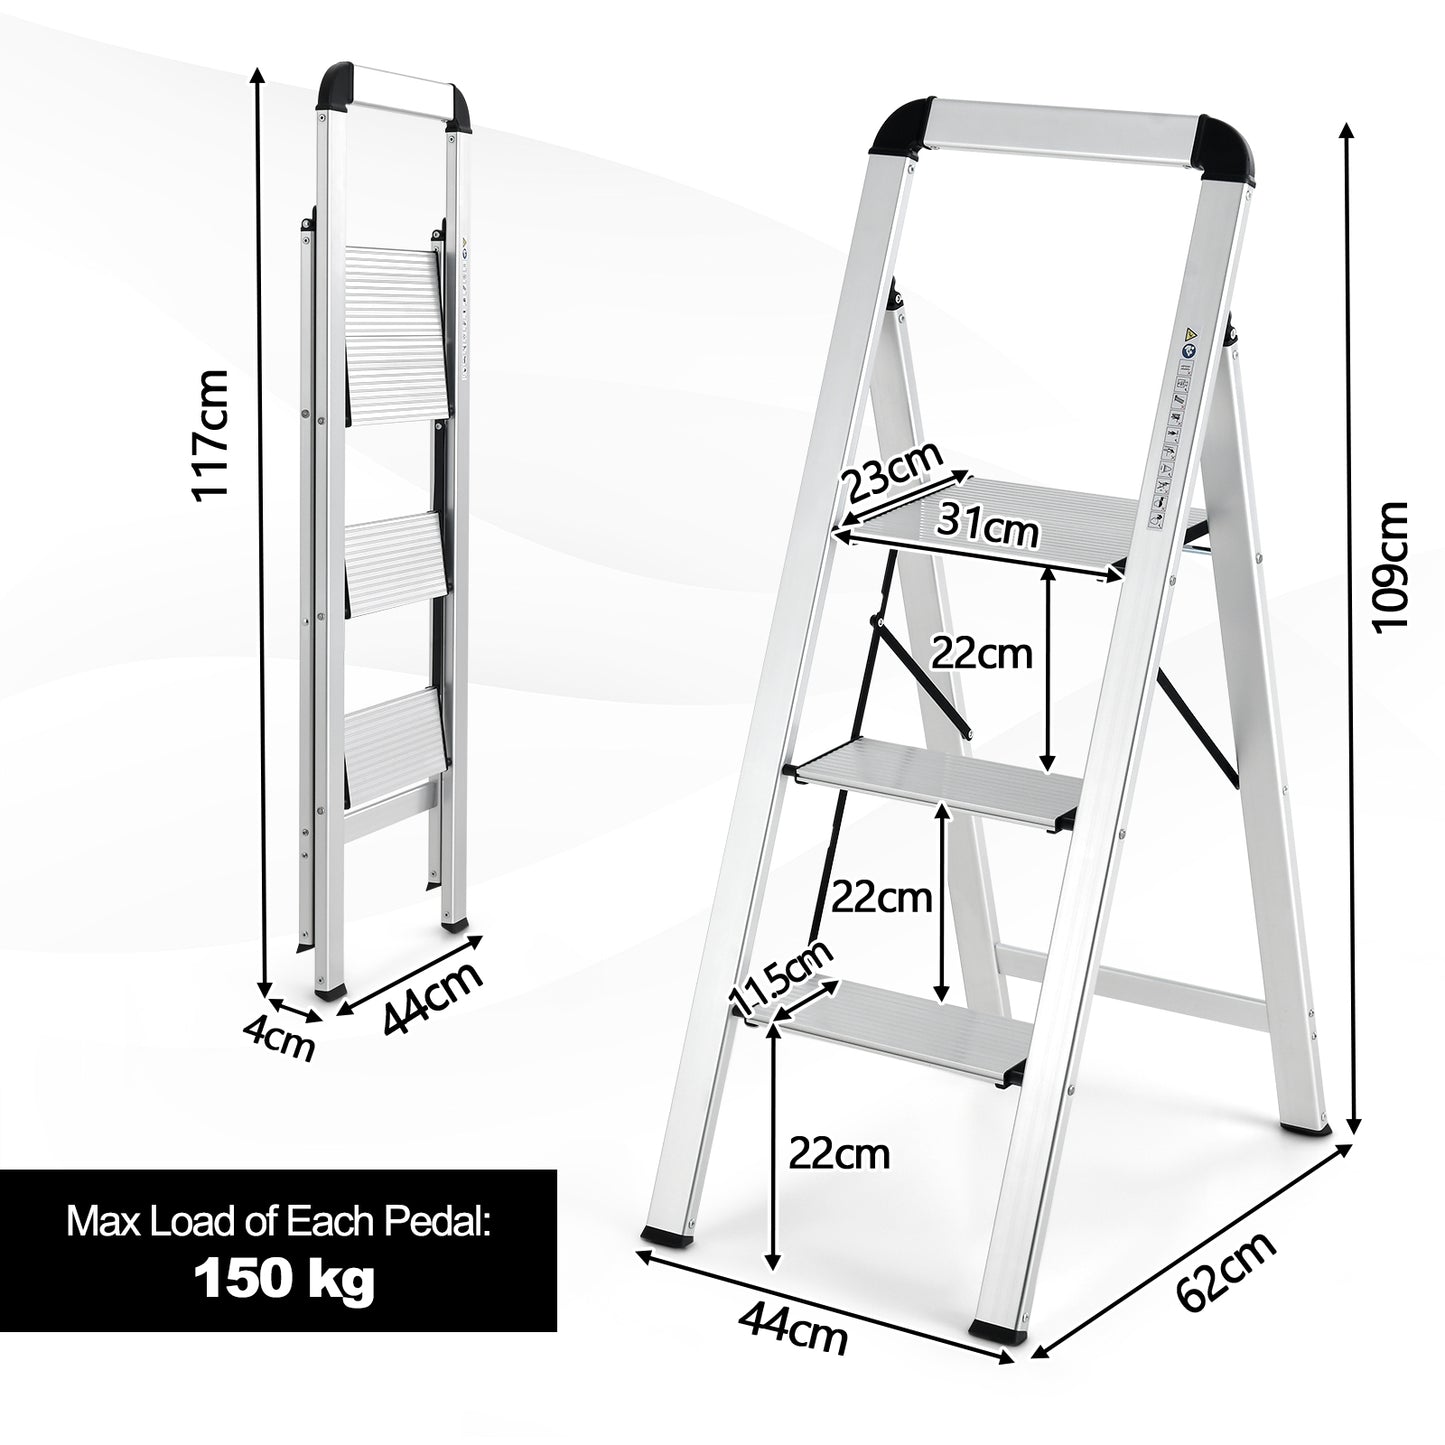 Step Ladder, 3 Step Ladder, Aluminum Step Ladder, Folding Step Stool with Non-Slip Pedal and Footpads, Silver, Costway, 3